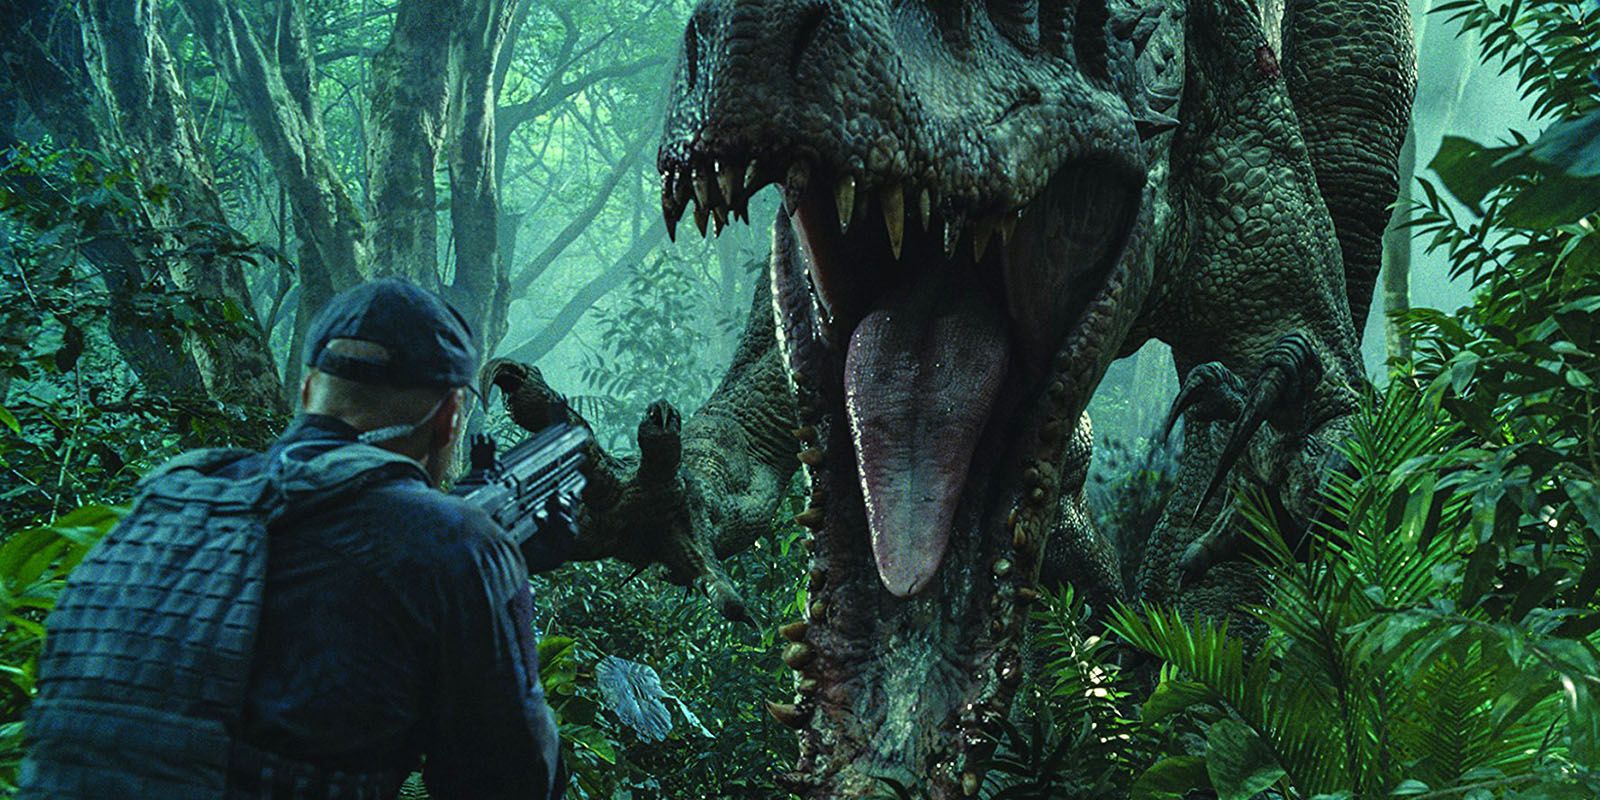 Indominus Rex attacked an armed man in Jurassic World